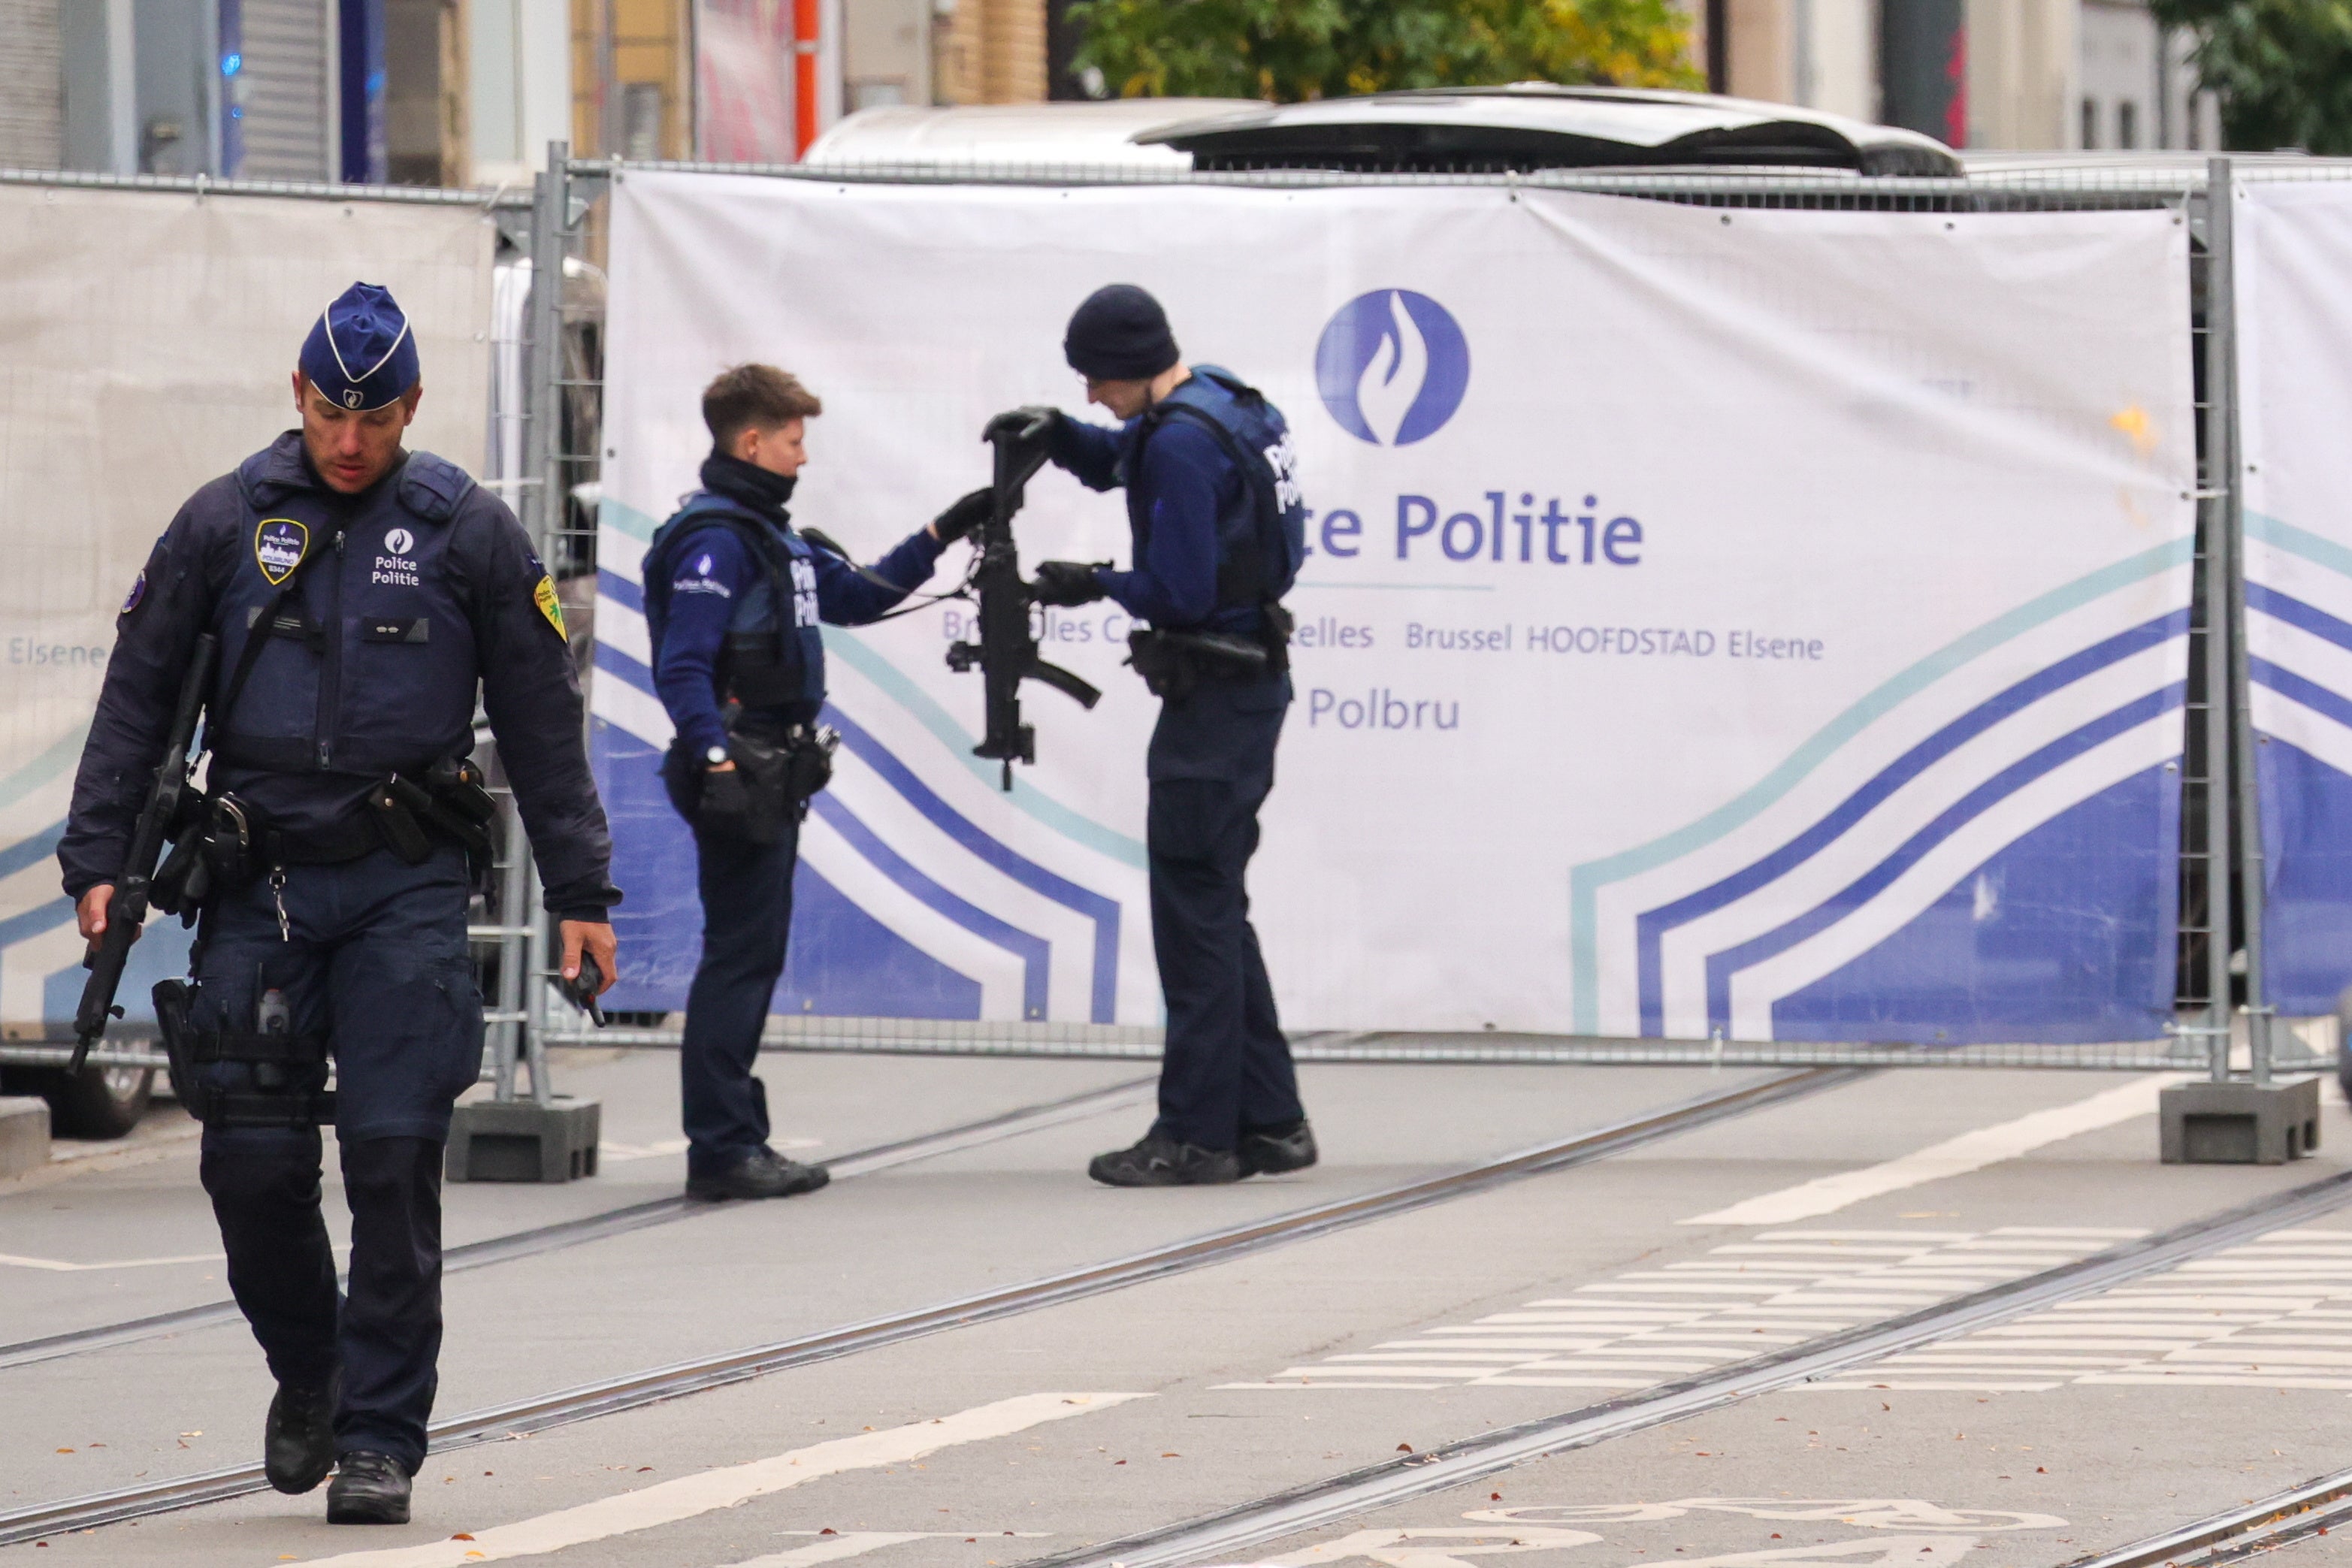 The suspect fled the scene after the shooting as a football match between Belgium and Sweden was about to start